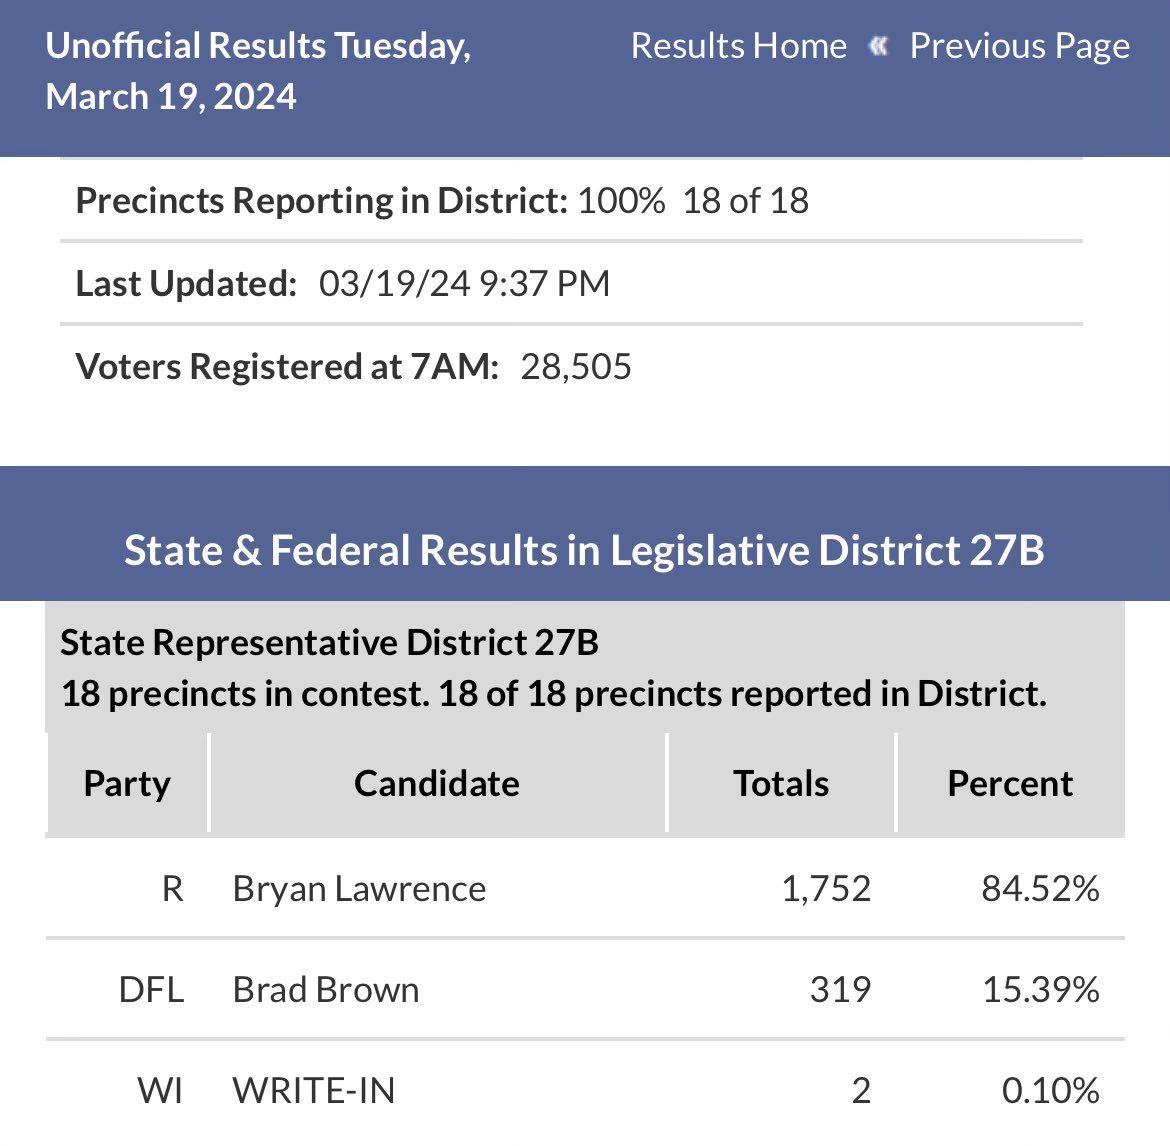 A squeaker in 27B tonight. Congrats to Rep-elect Bryan Lawrence! 11 point improvement on 2022 results 👀 #mnleg